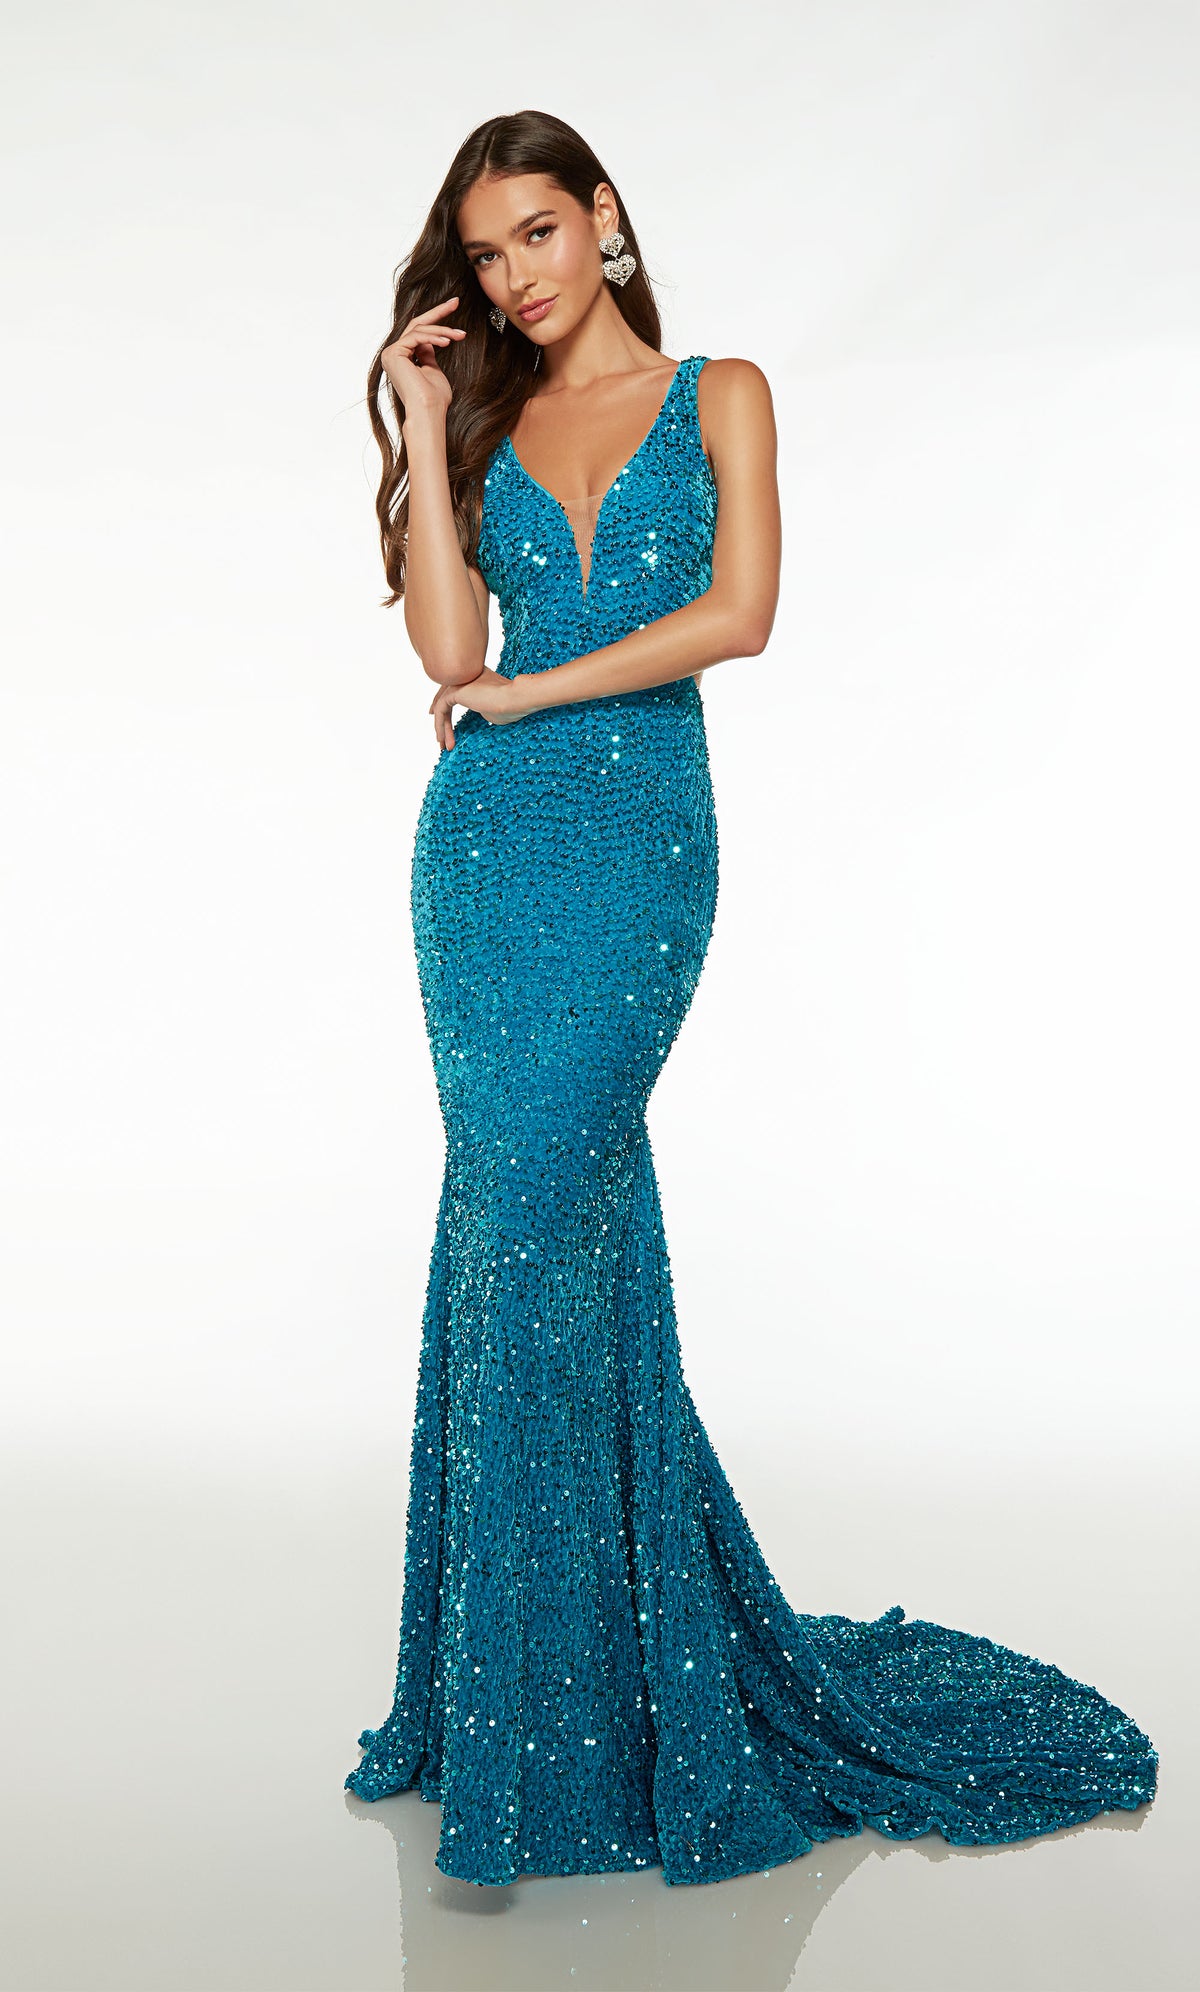 Gorgeous fit-and-flare designer dress in ocean blue plush sequins: plunging neckline, illusion side cutouts, V-shaped open back, and train.